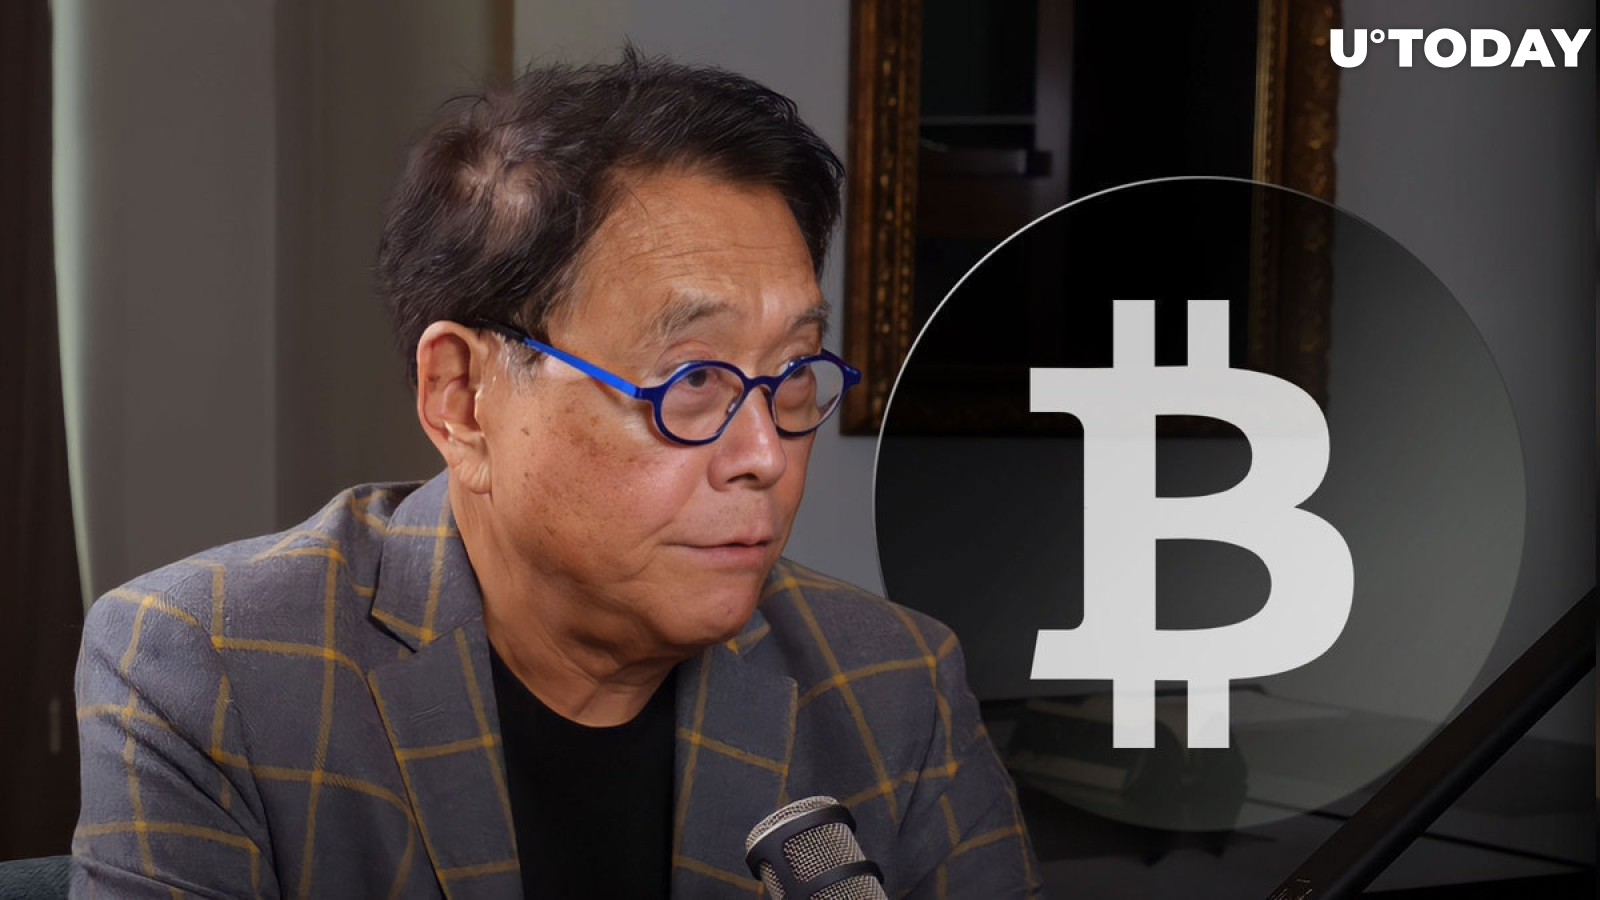 'Rich Dad Poor Dad' Author Says Time to Buy 'Real Bitcoin' as Giant Bank Goes Bust